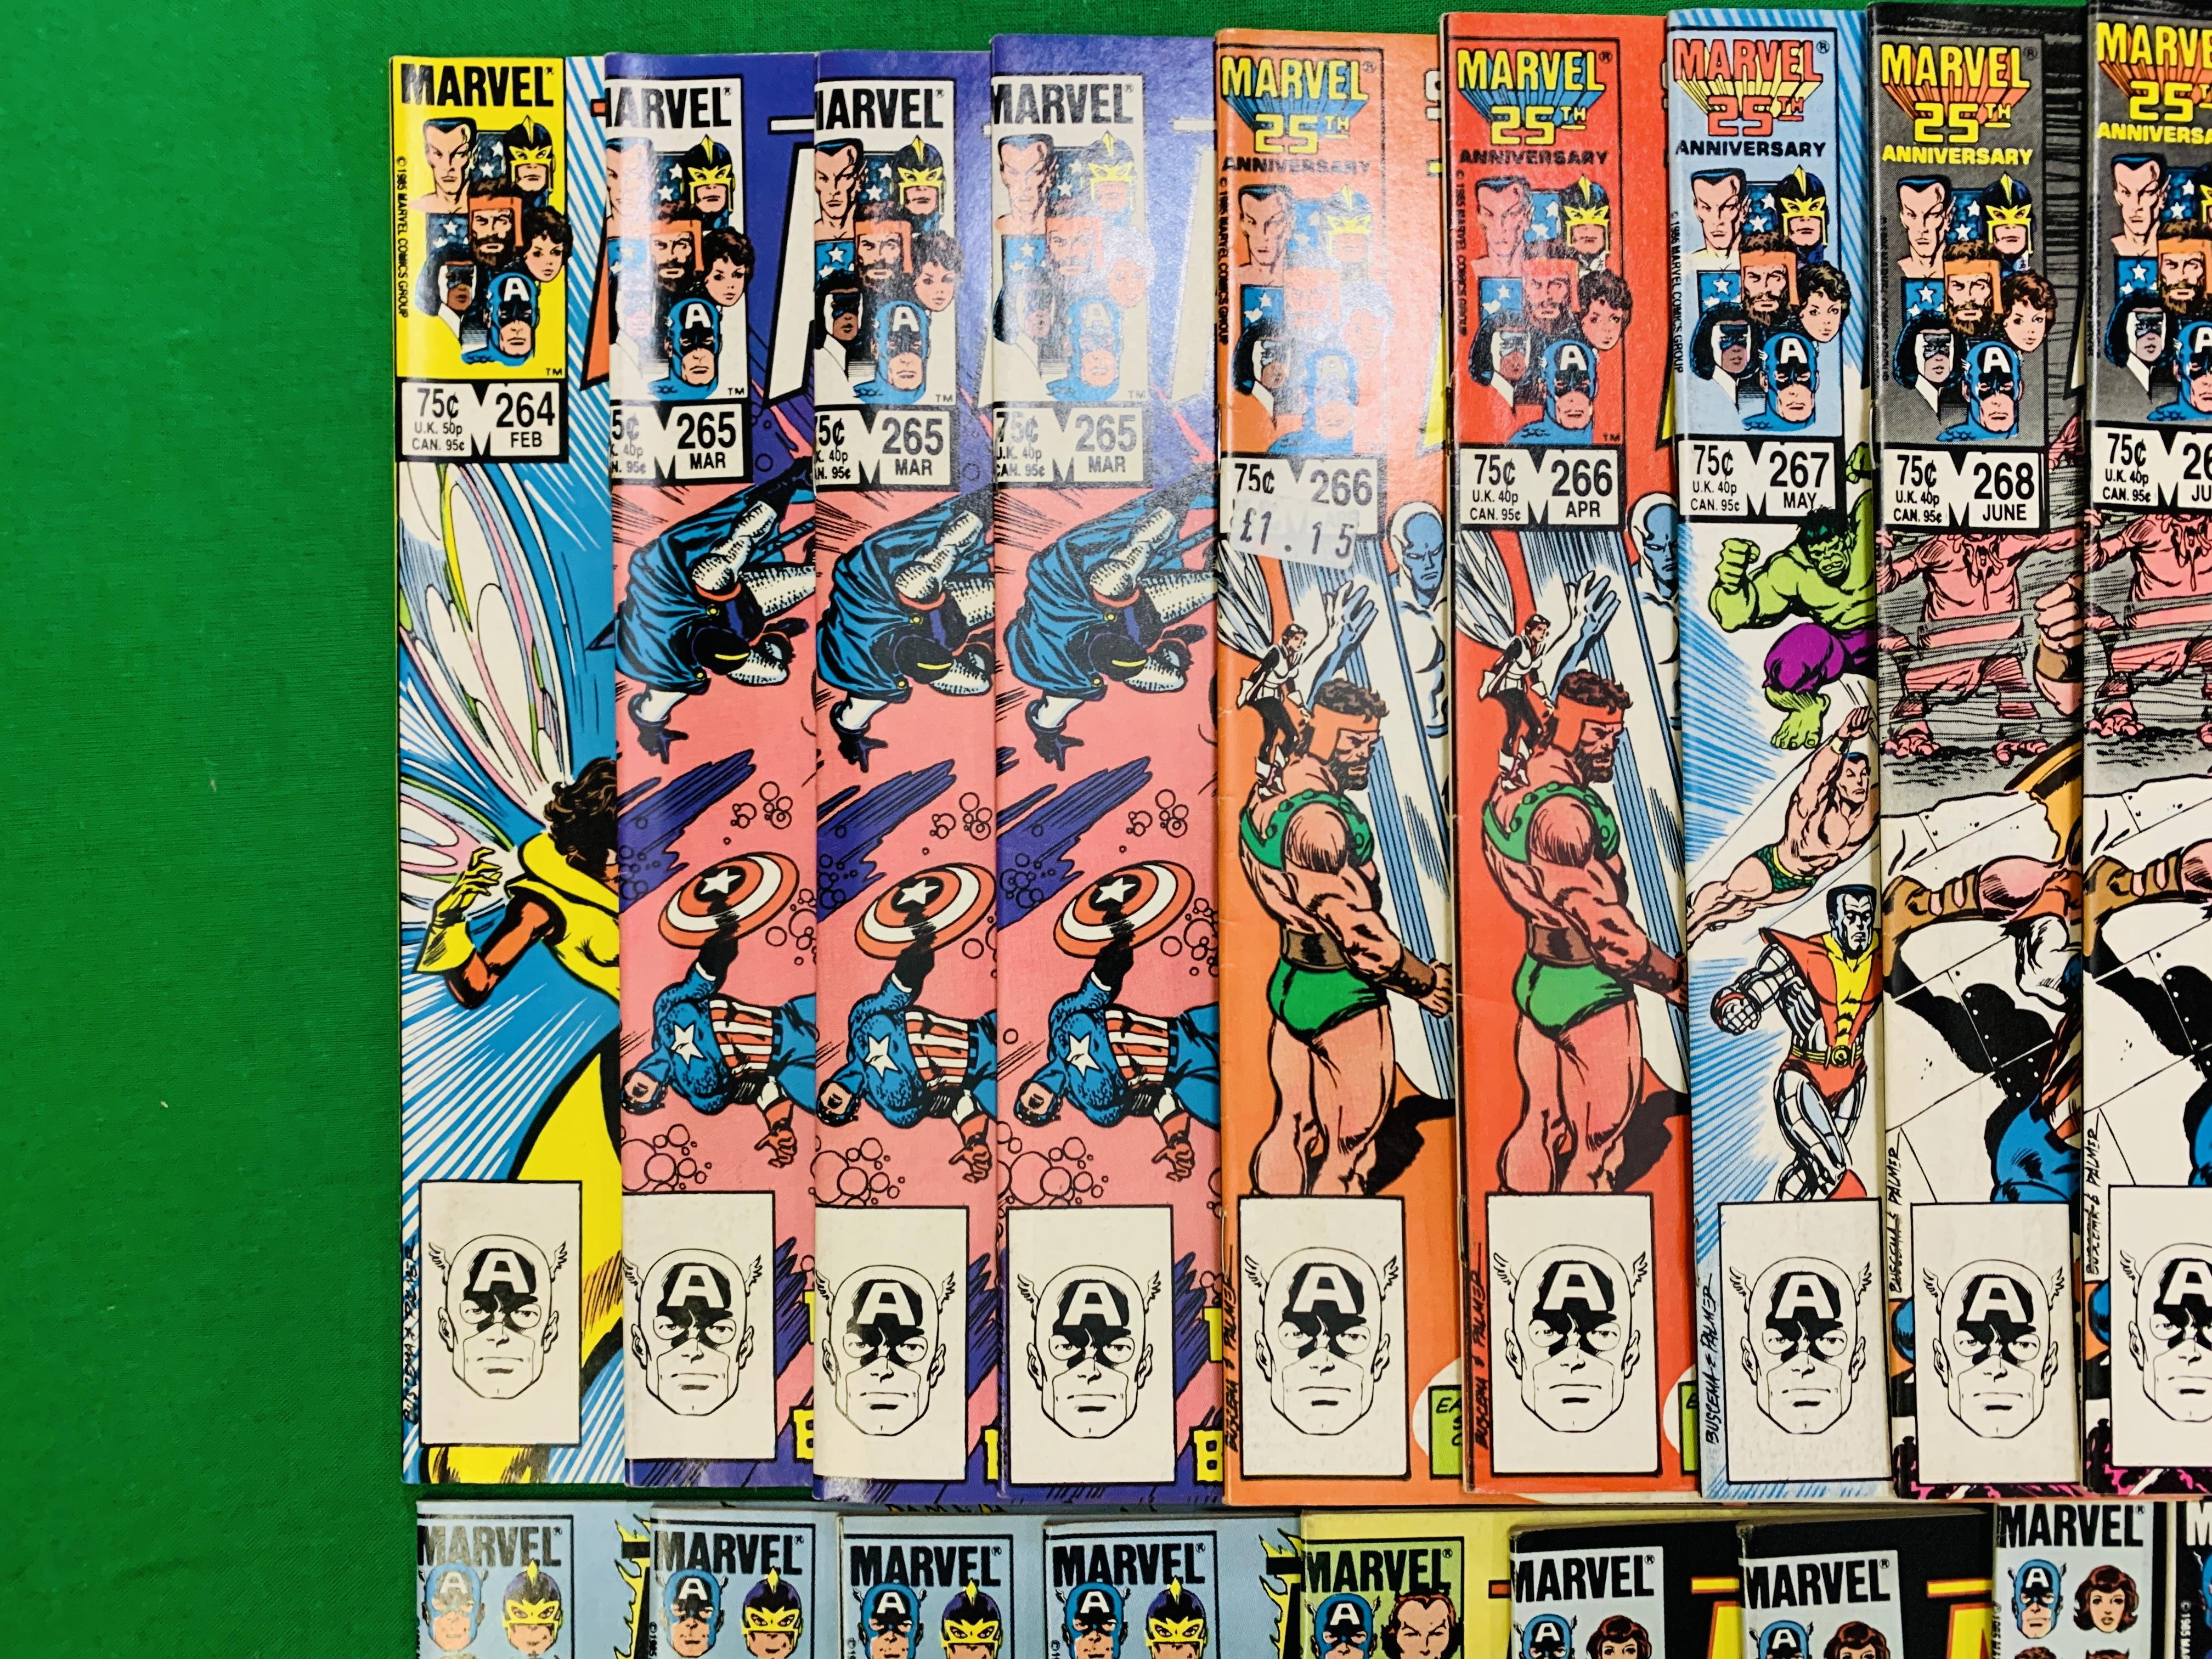 MARVEL COMICS THE AVENGERS NO. 101 - 299, MISSING ISSUES 103 AND 110. - Image 115 of 130